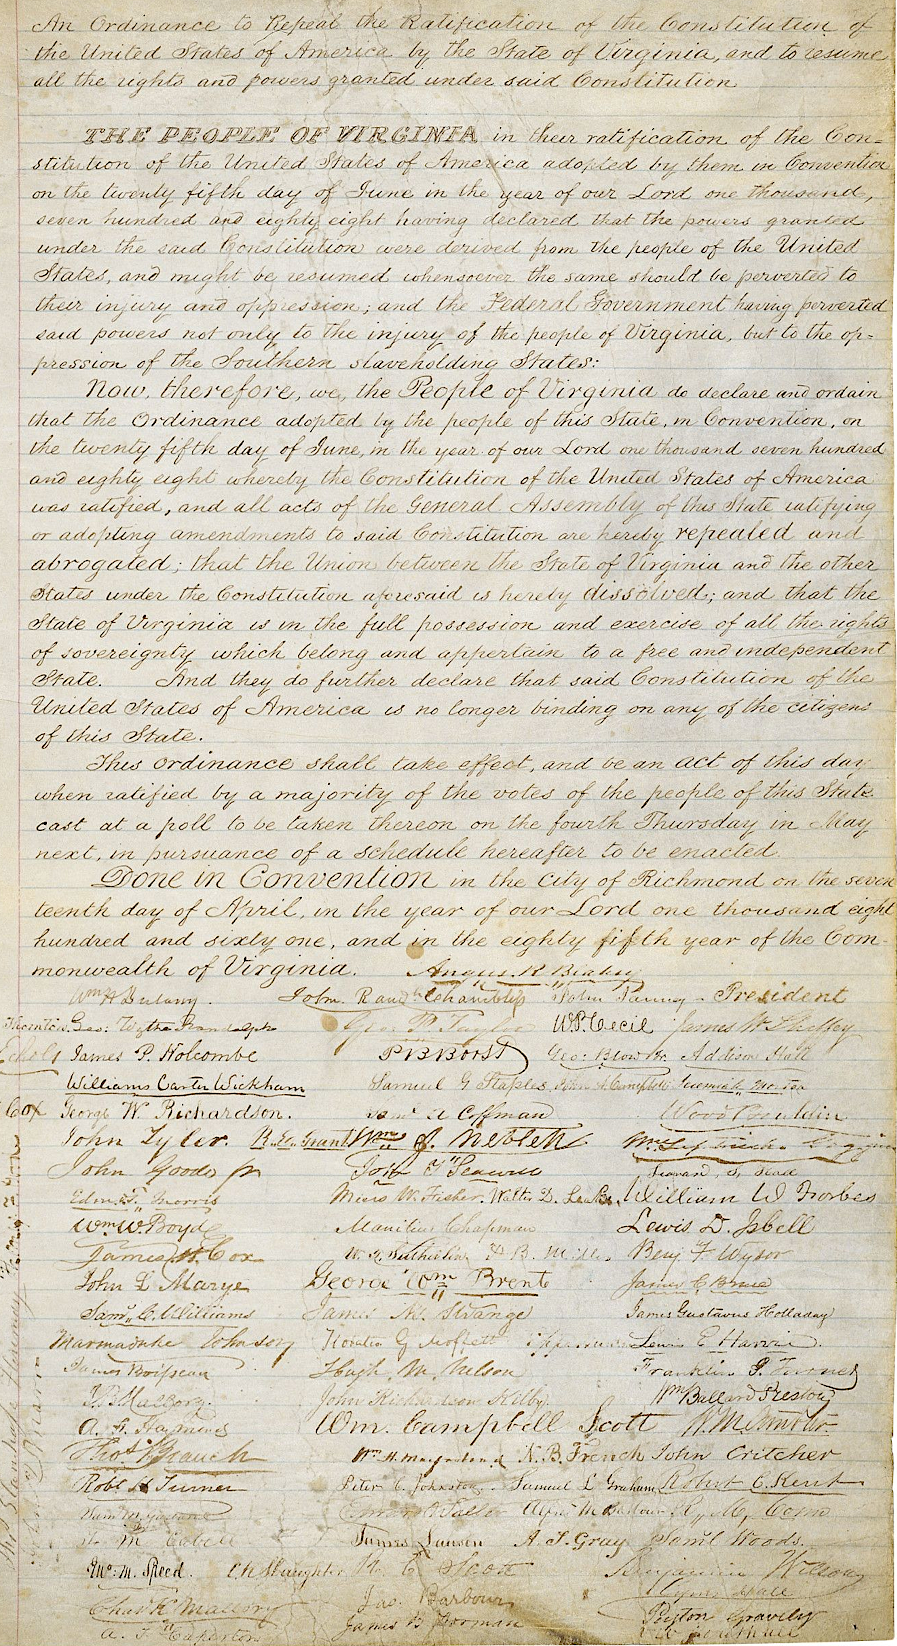 the 1861 Constitution was drafted after the Secession Convention approved the Ordinance of Secession